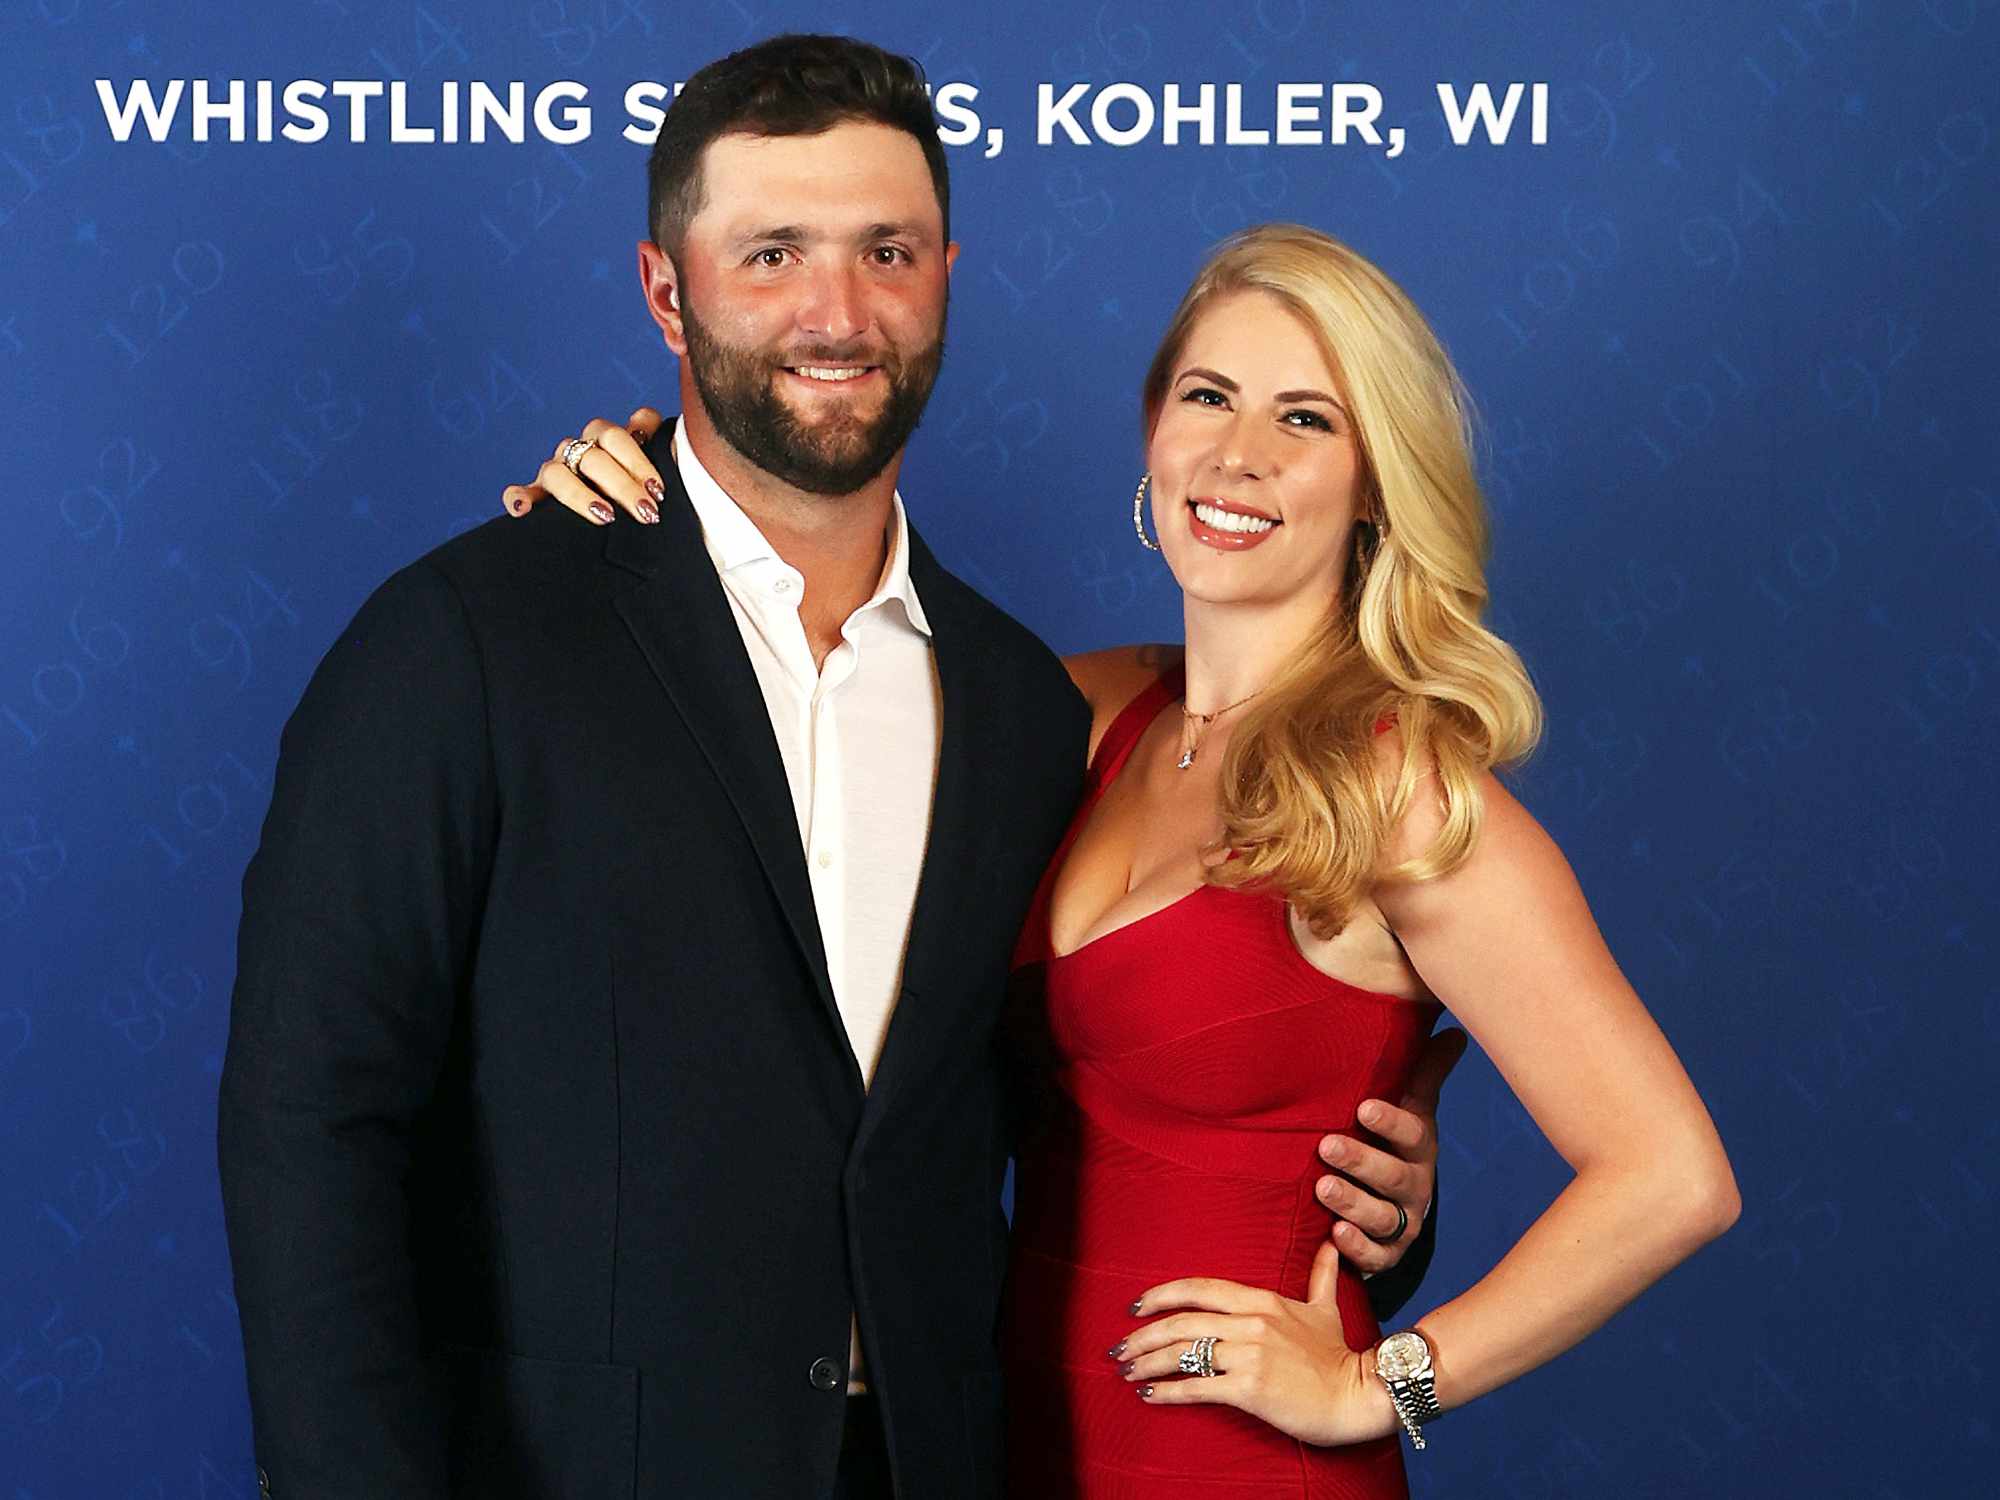 Jon Rahm and wife Kelley Cahill pose for a photo during the Team Europe Gala Dinner prior to the 43rd Ryder Cup at The American Club on September 22, 2021 in Kohler, Wisconsin.